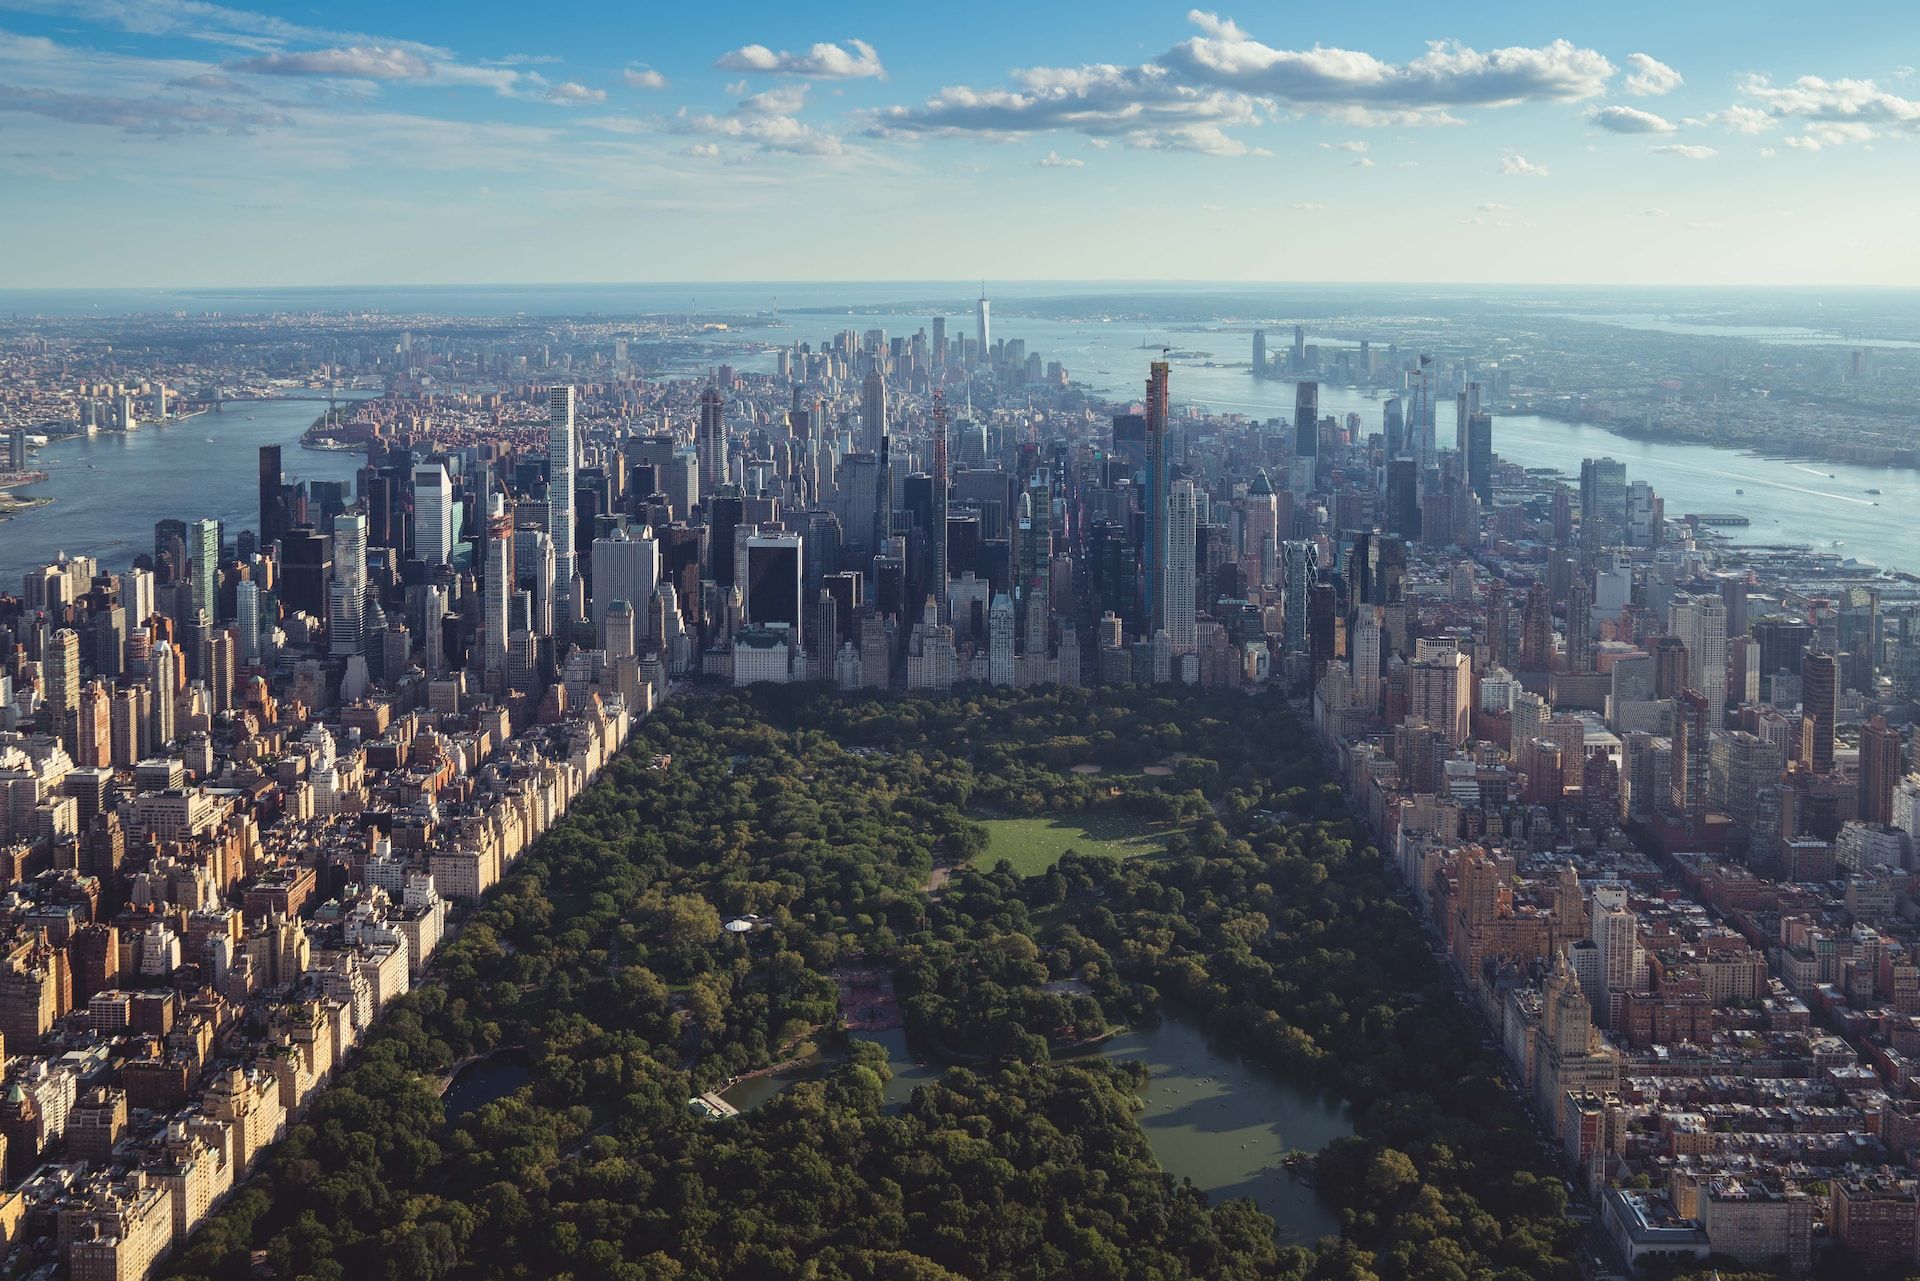 Wide and long view of Manhattan from the sky with central park, the New York City skyline, and Hudson river all in view